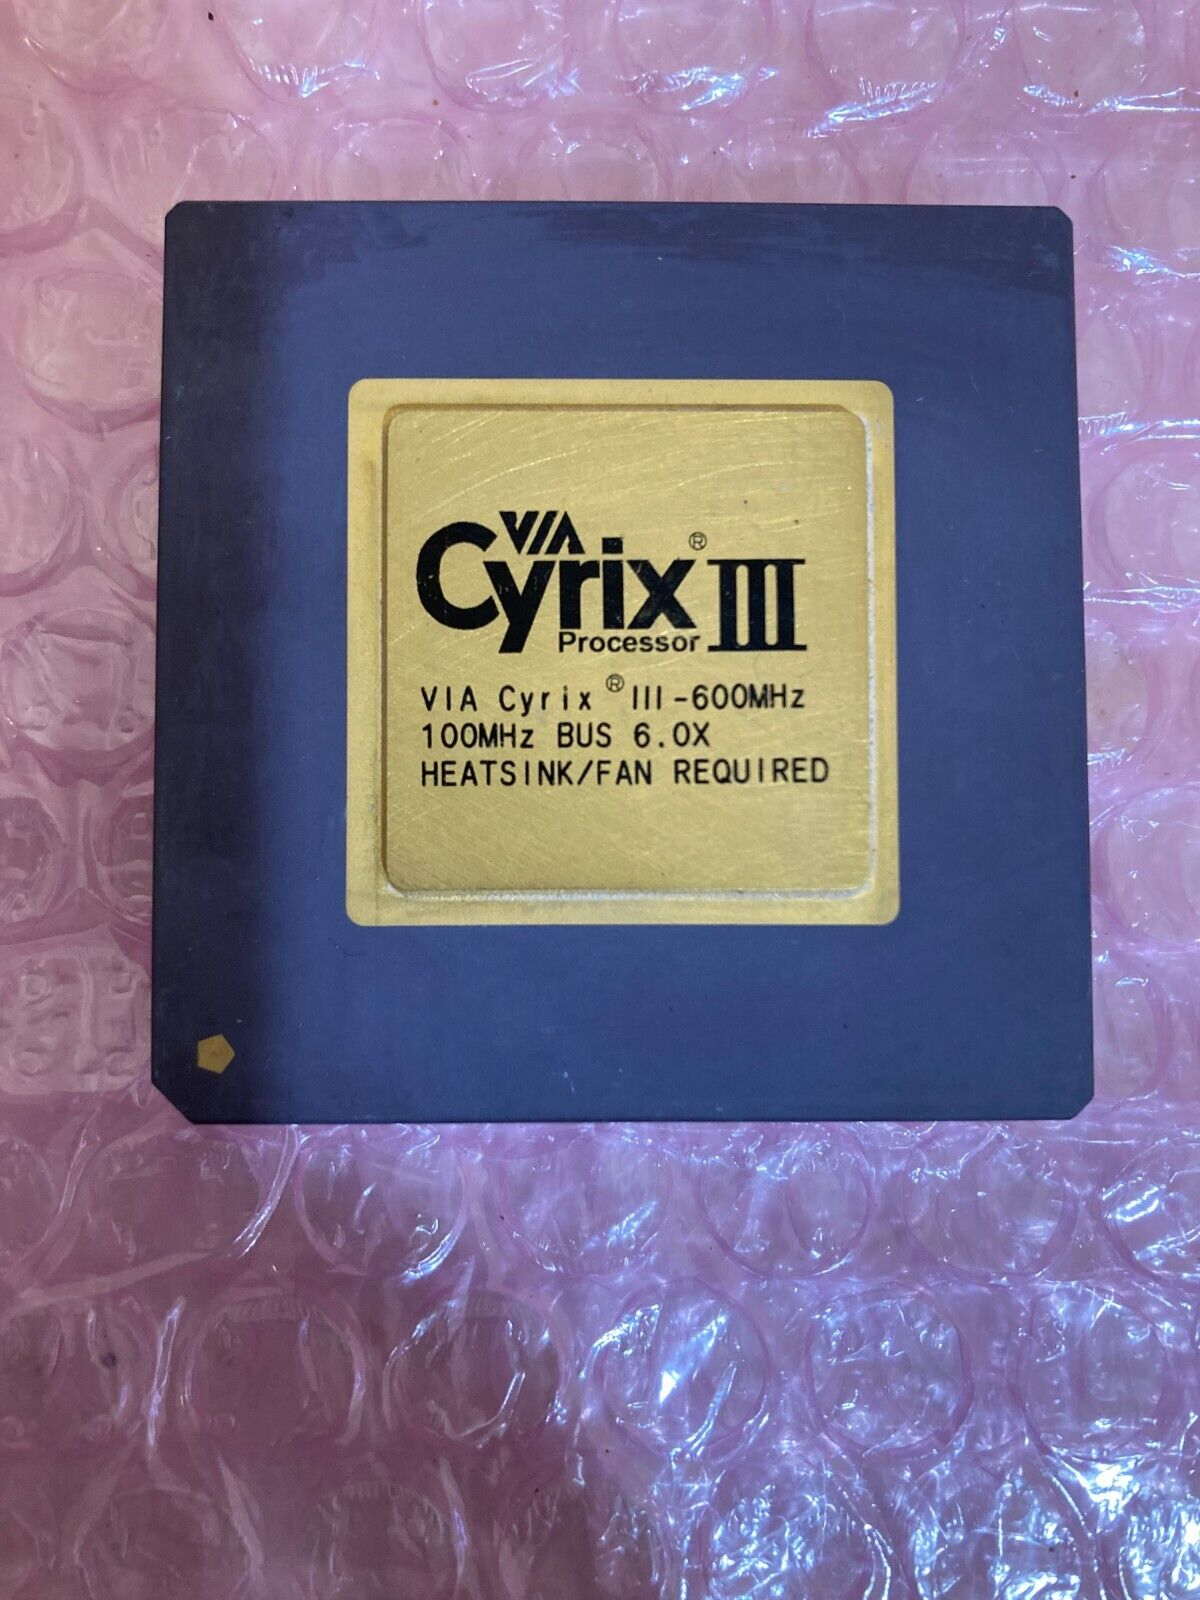 Vintage VIA Cyrix III Processor 600MHz 100MHz Bus 6. OX CPU for Gold Recovery